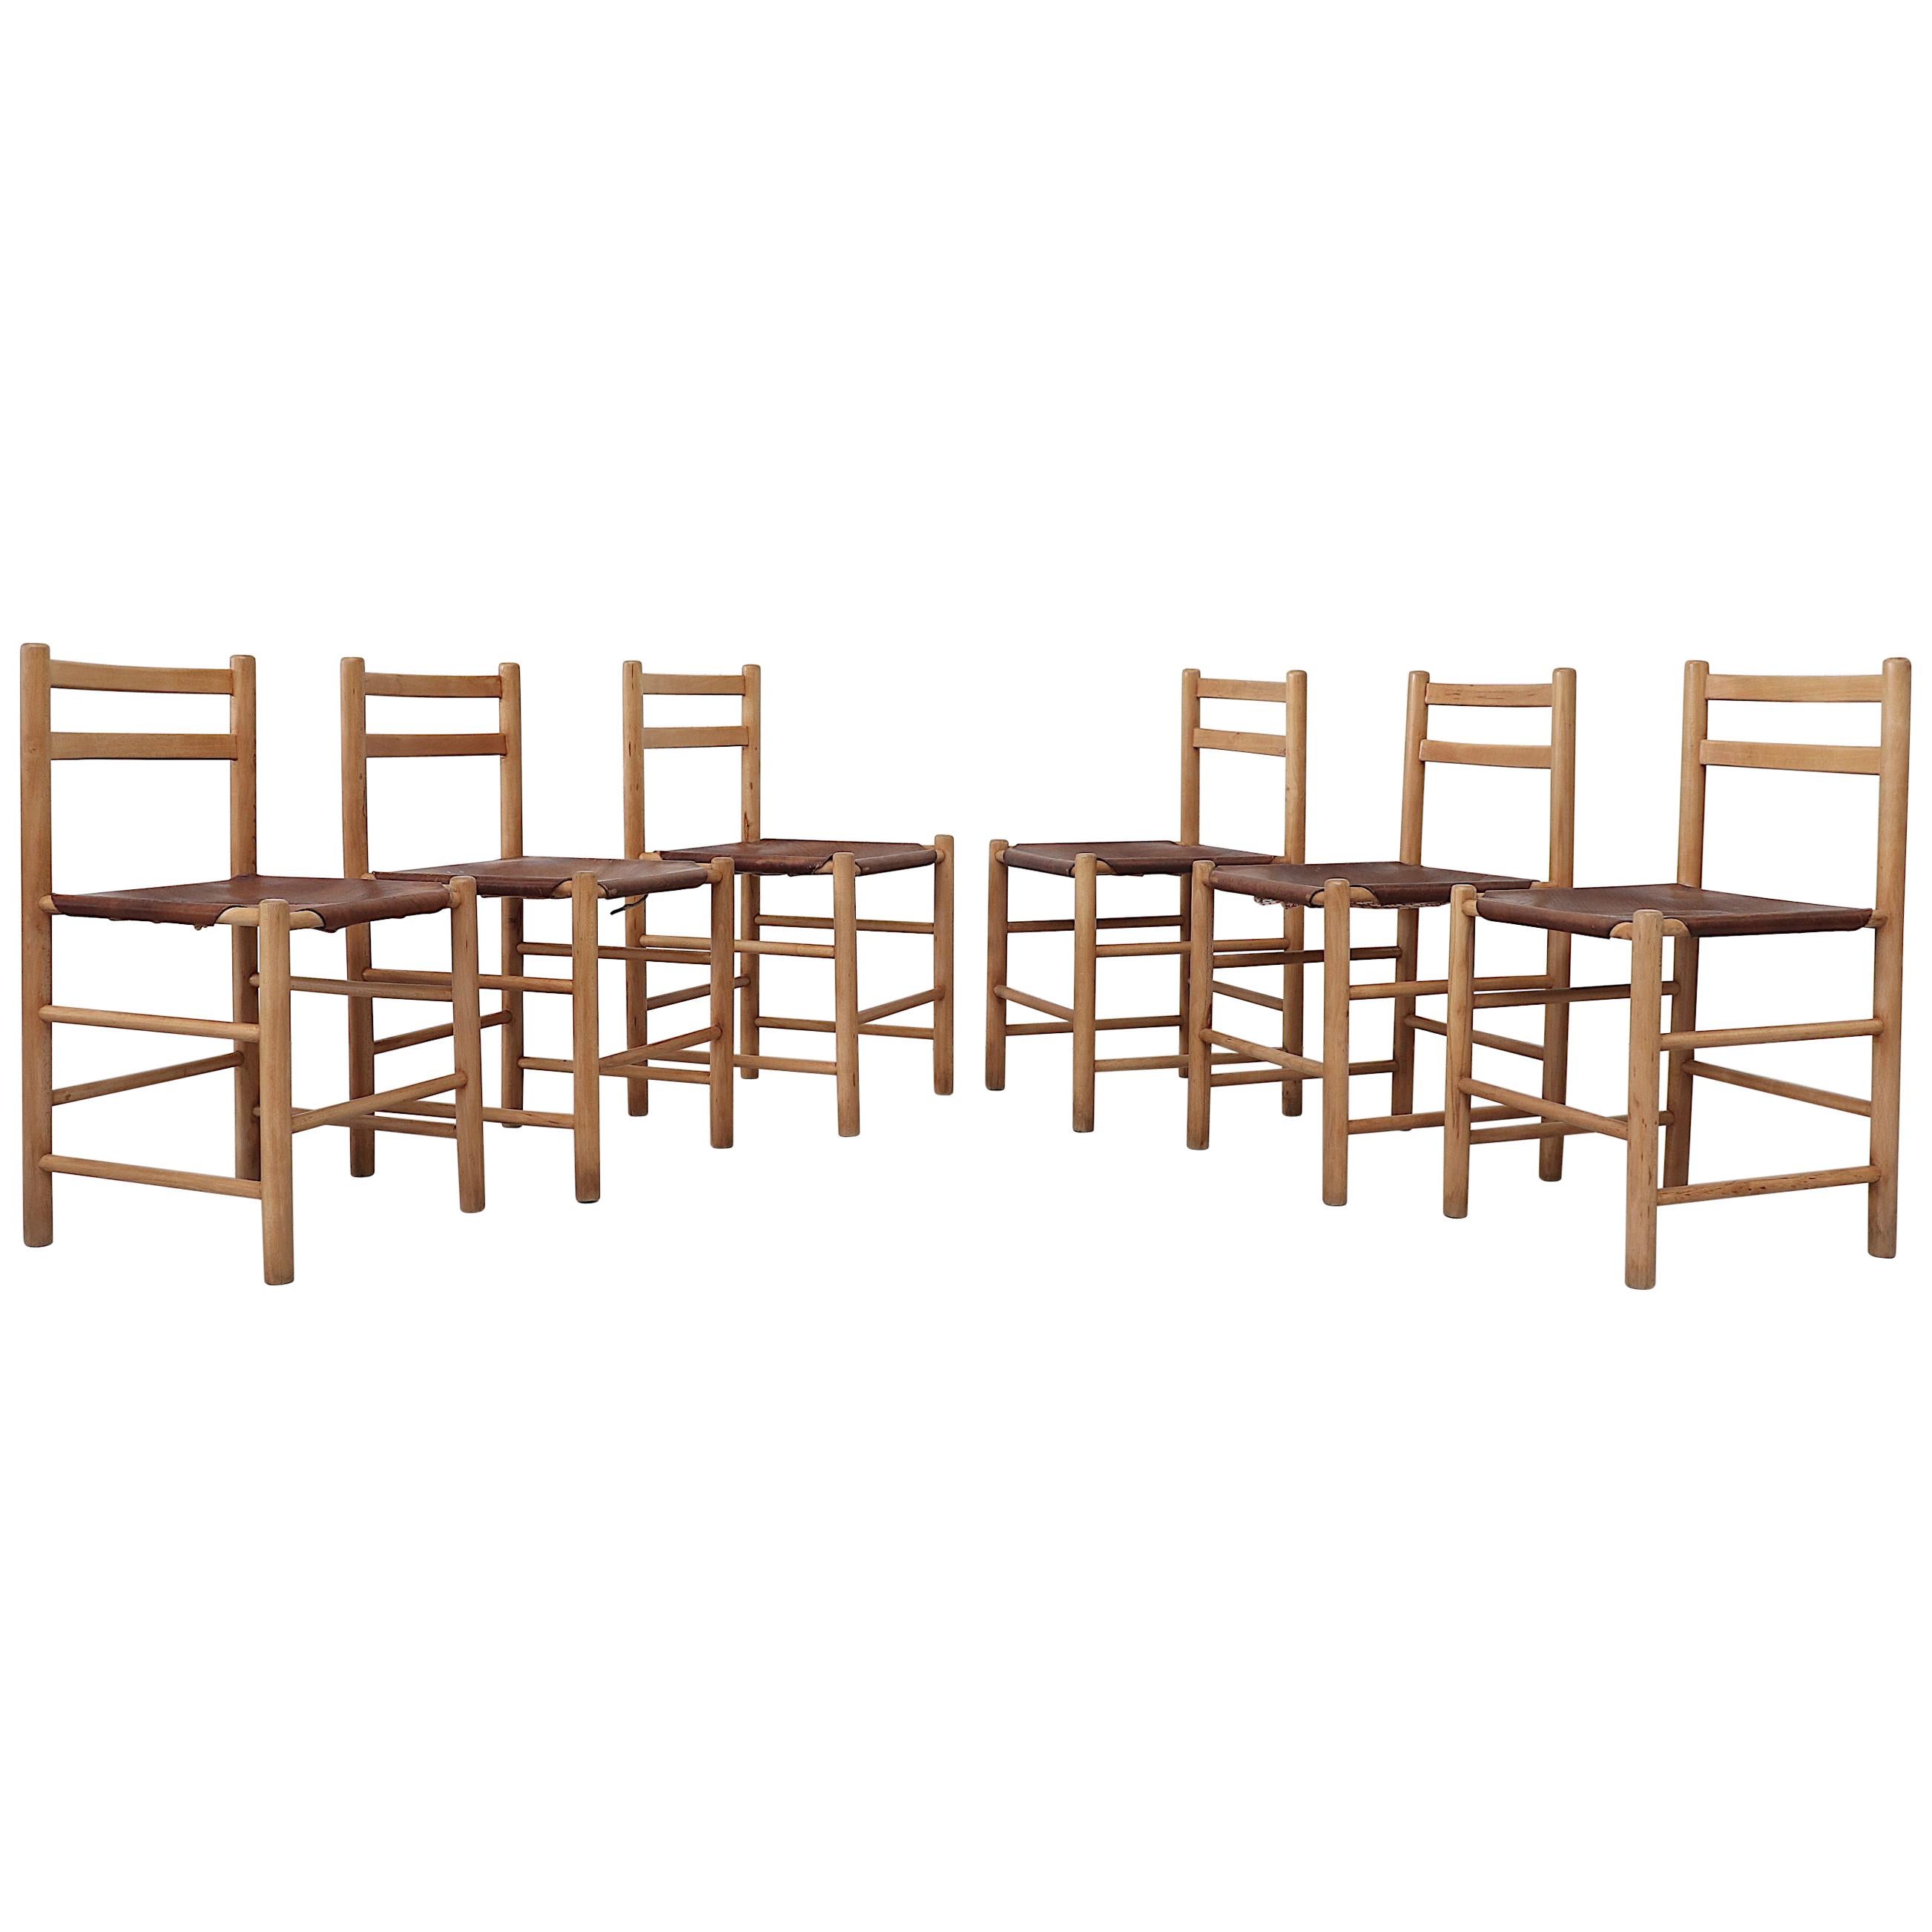 Set of 6 Charlotte Perriand Style Pine and Leather Dining Chairs